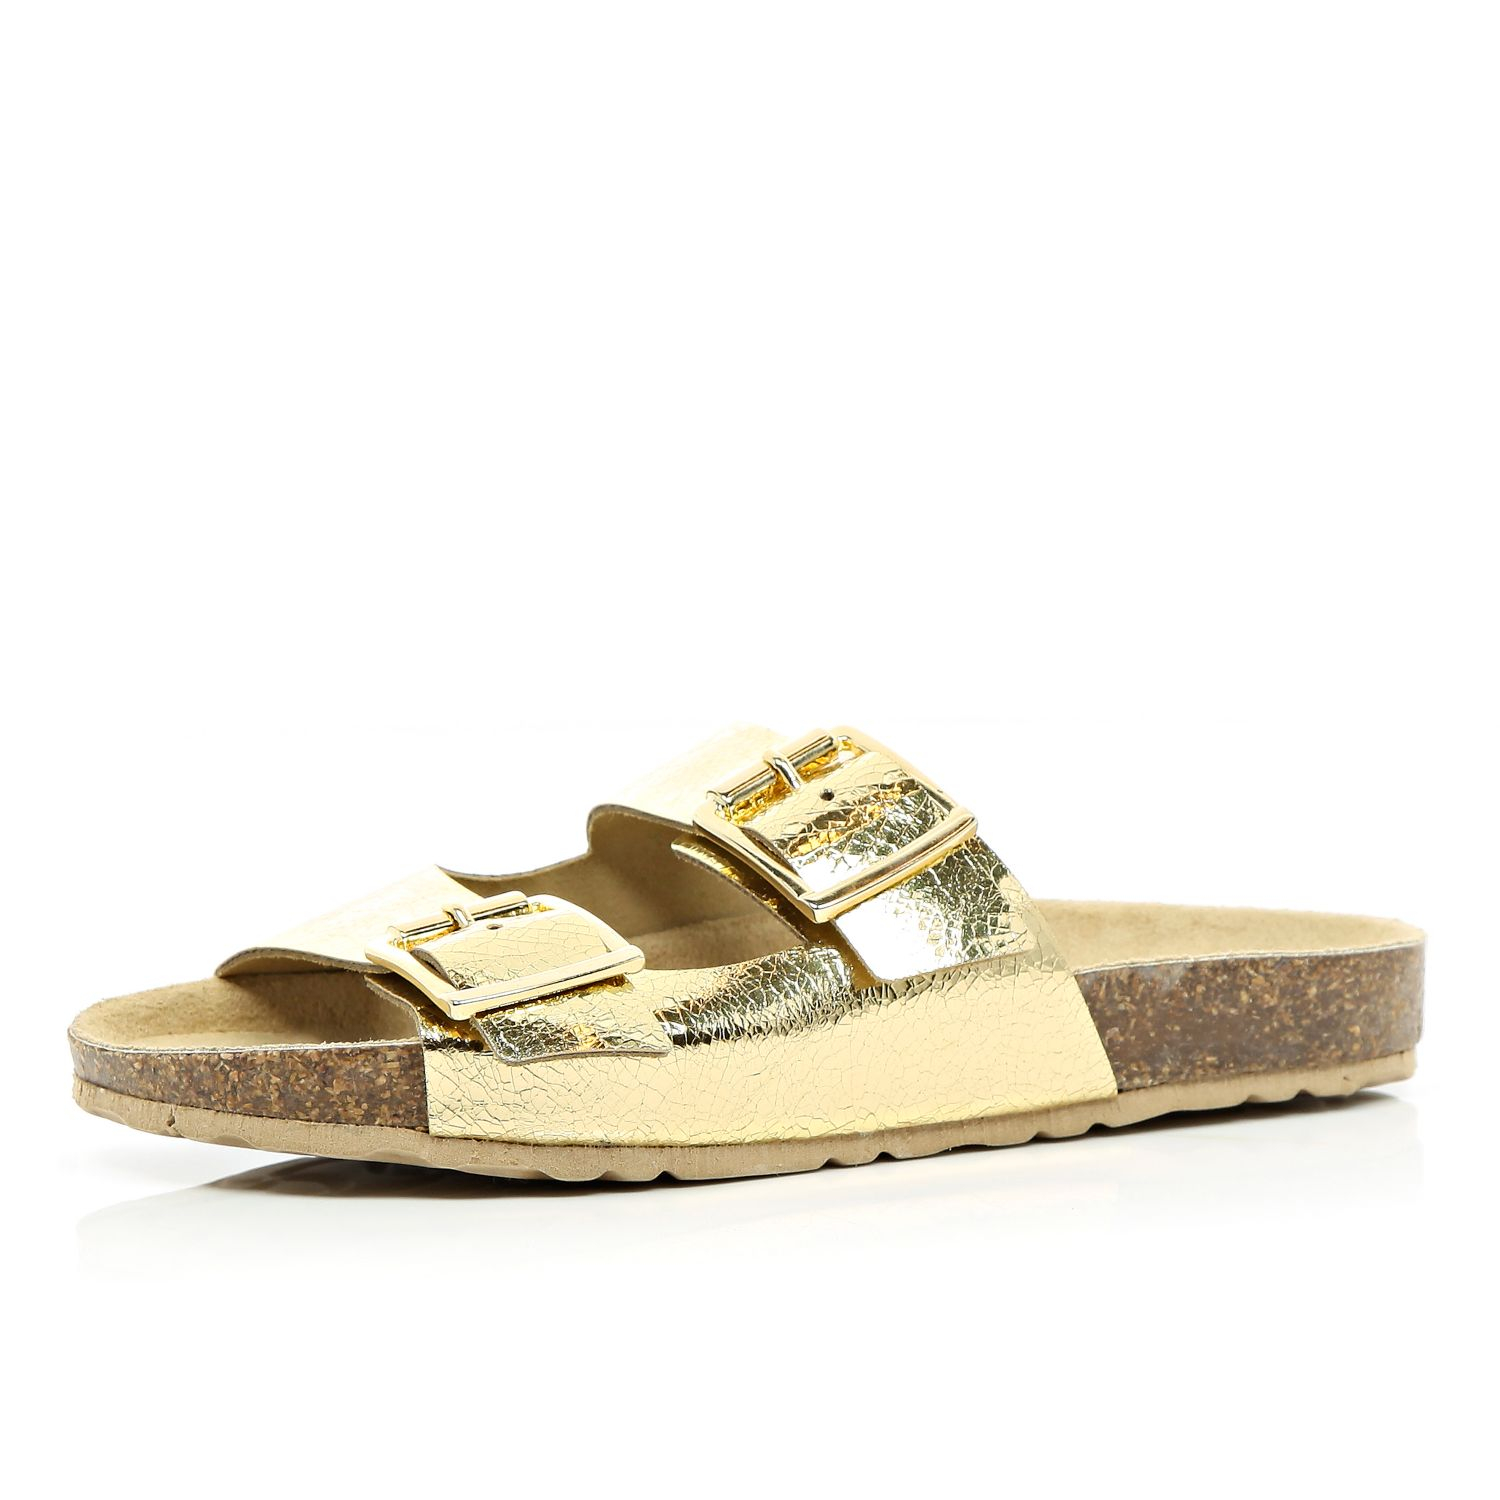 River Island Gold Metallic Double Strap Mule Sandals in Gold | Lyst